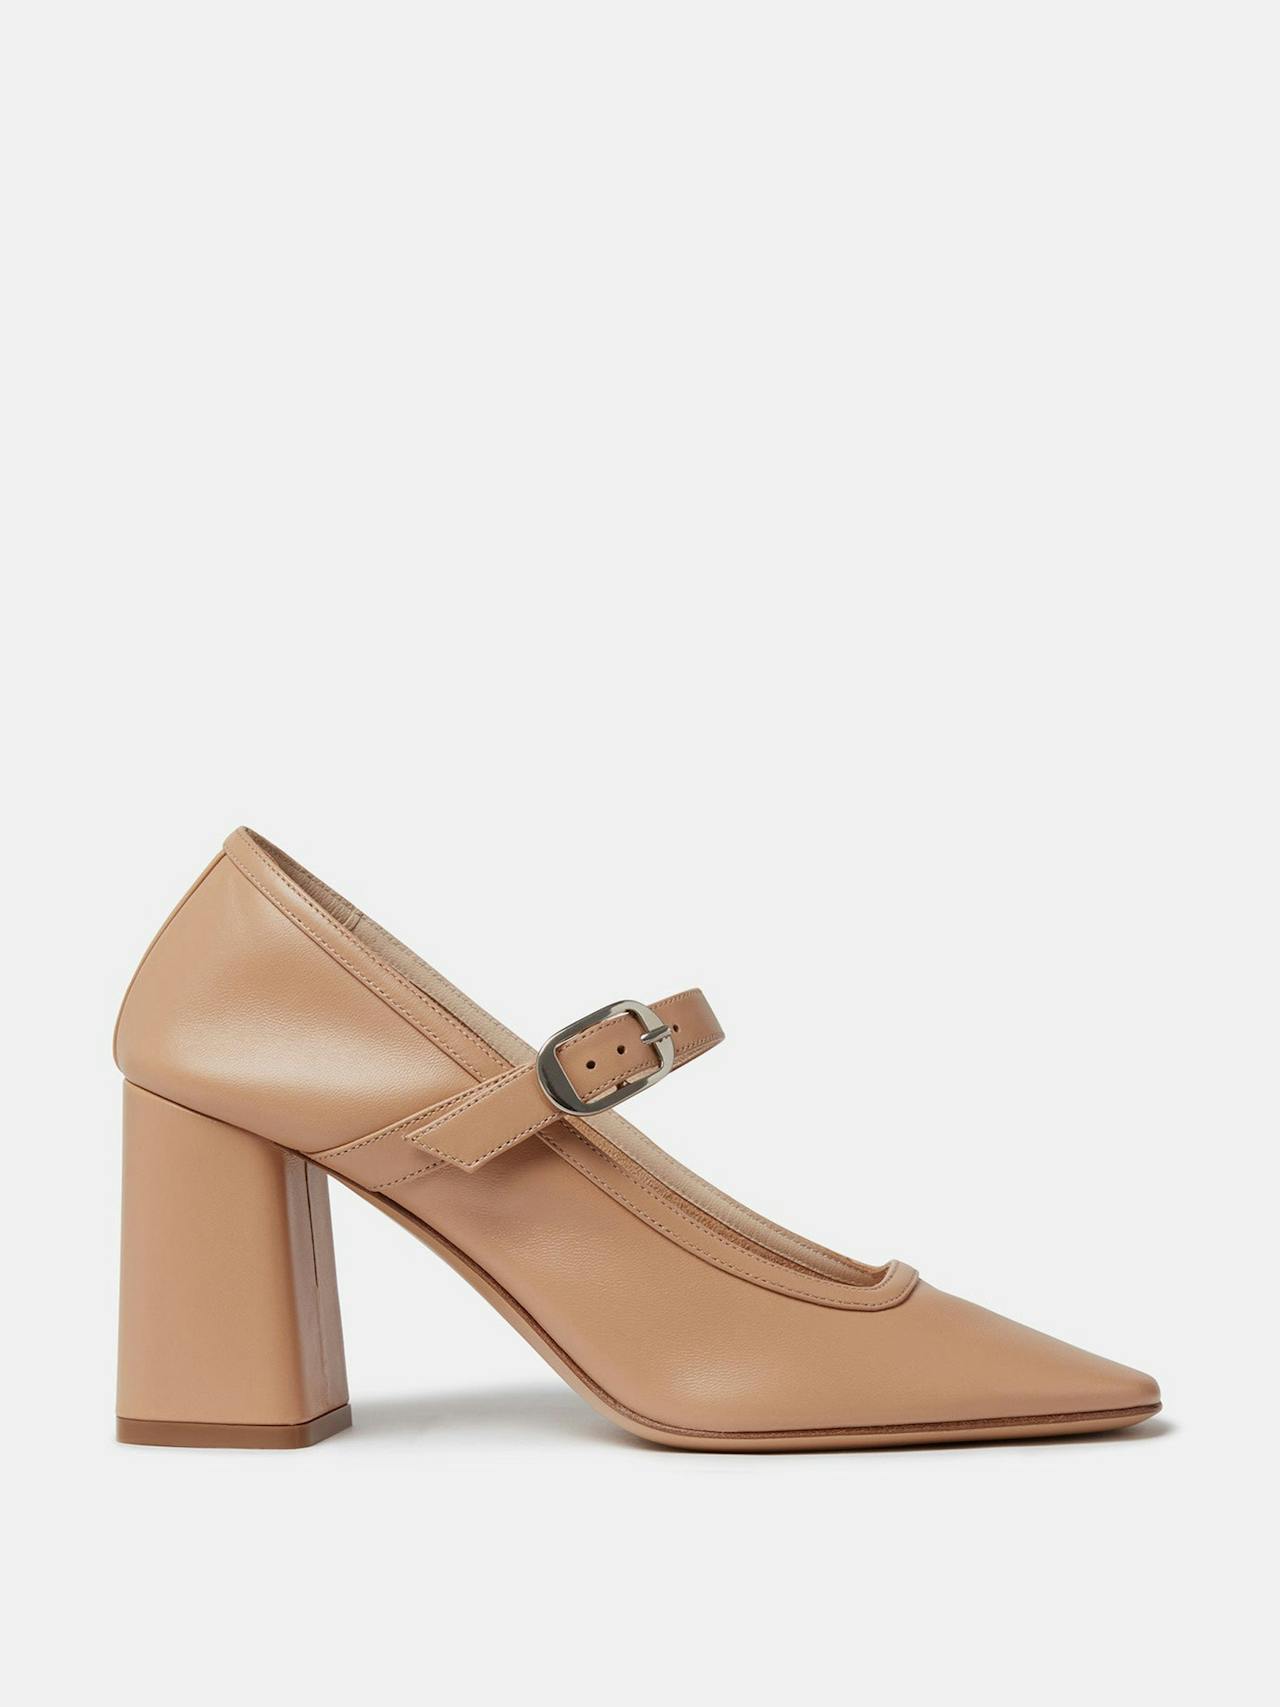 Fawn leather ballet Mary Jane pumps